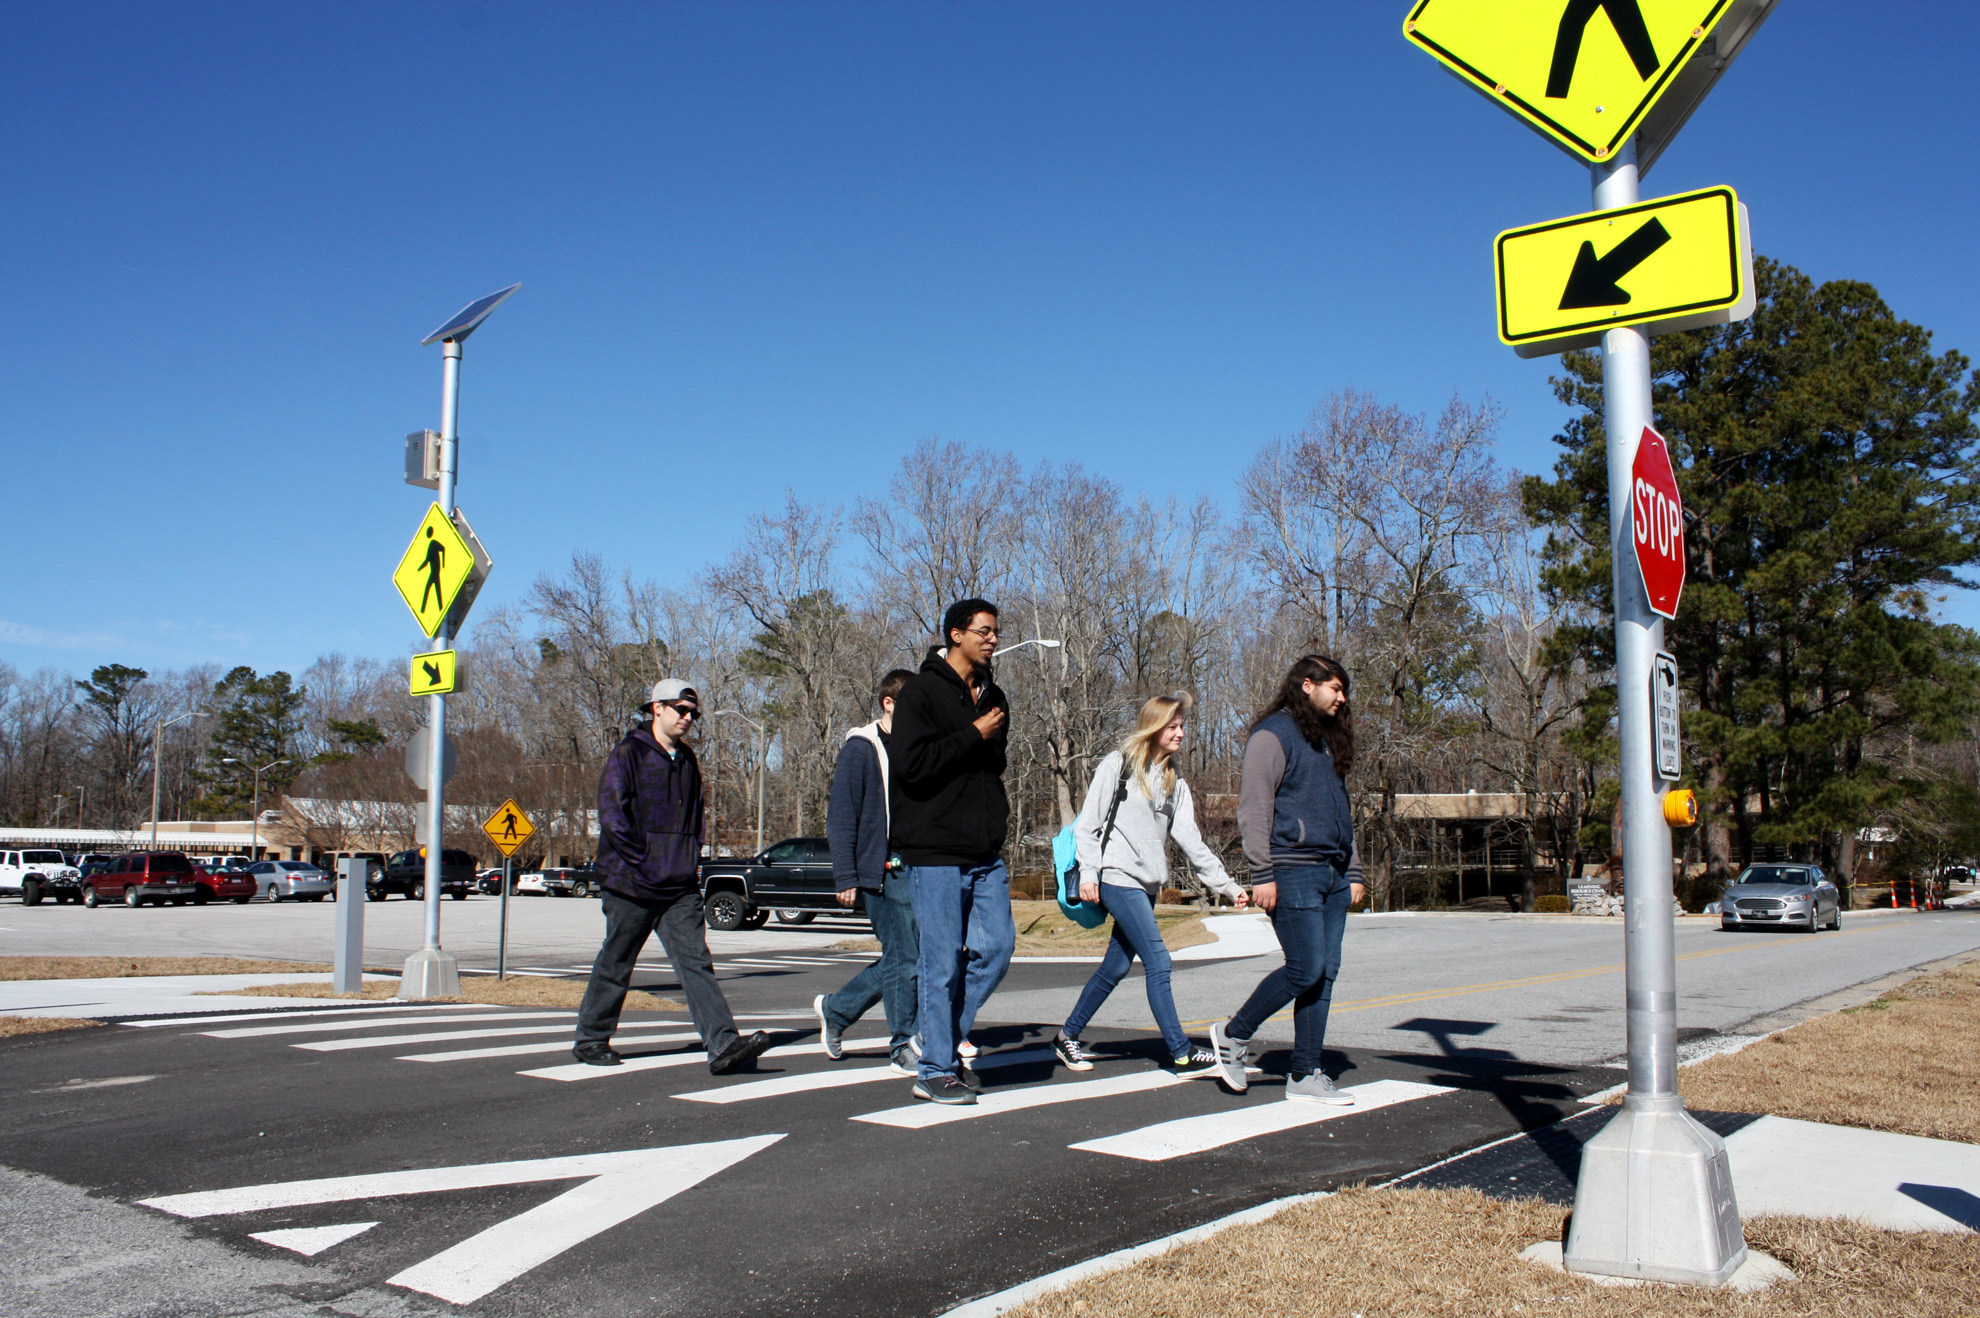 Five students cross at a protected intersection.